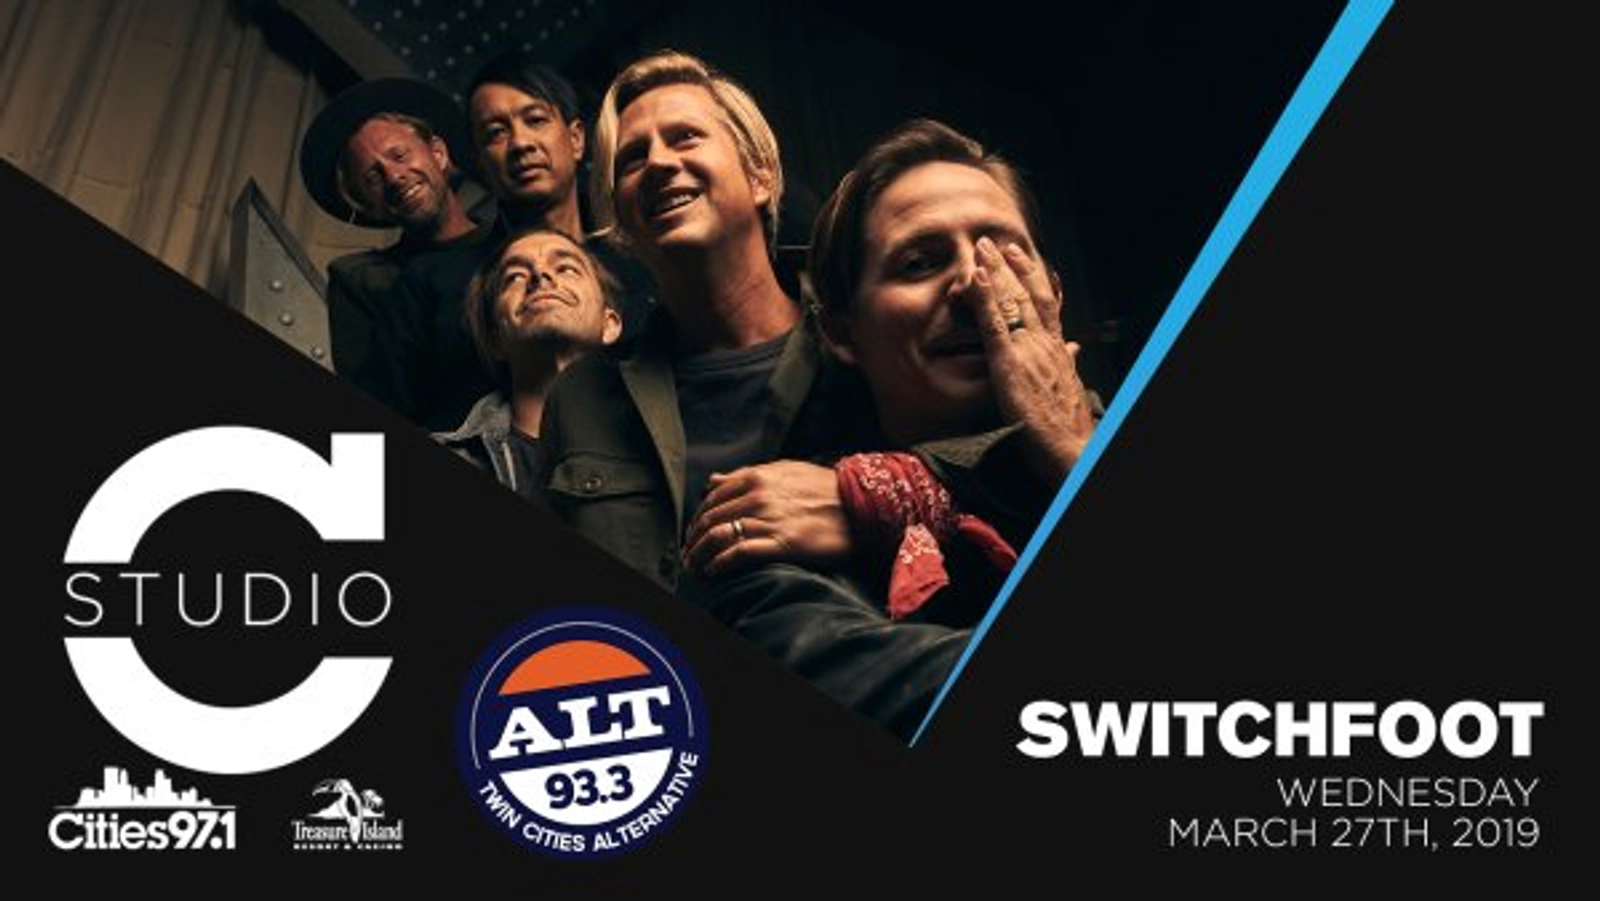 Enter to win Studio C passes to see Switchfoot! - Thumbnail Image